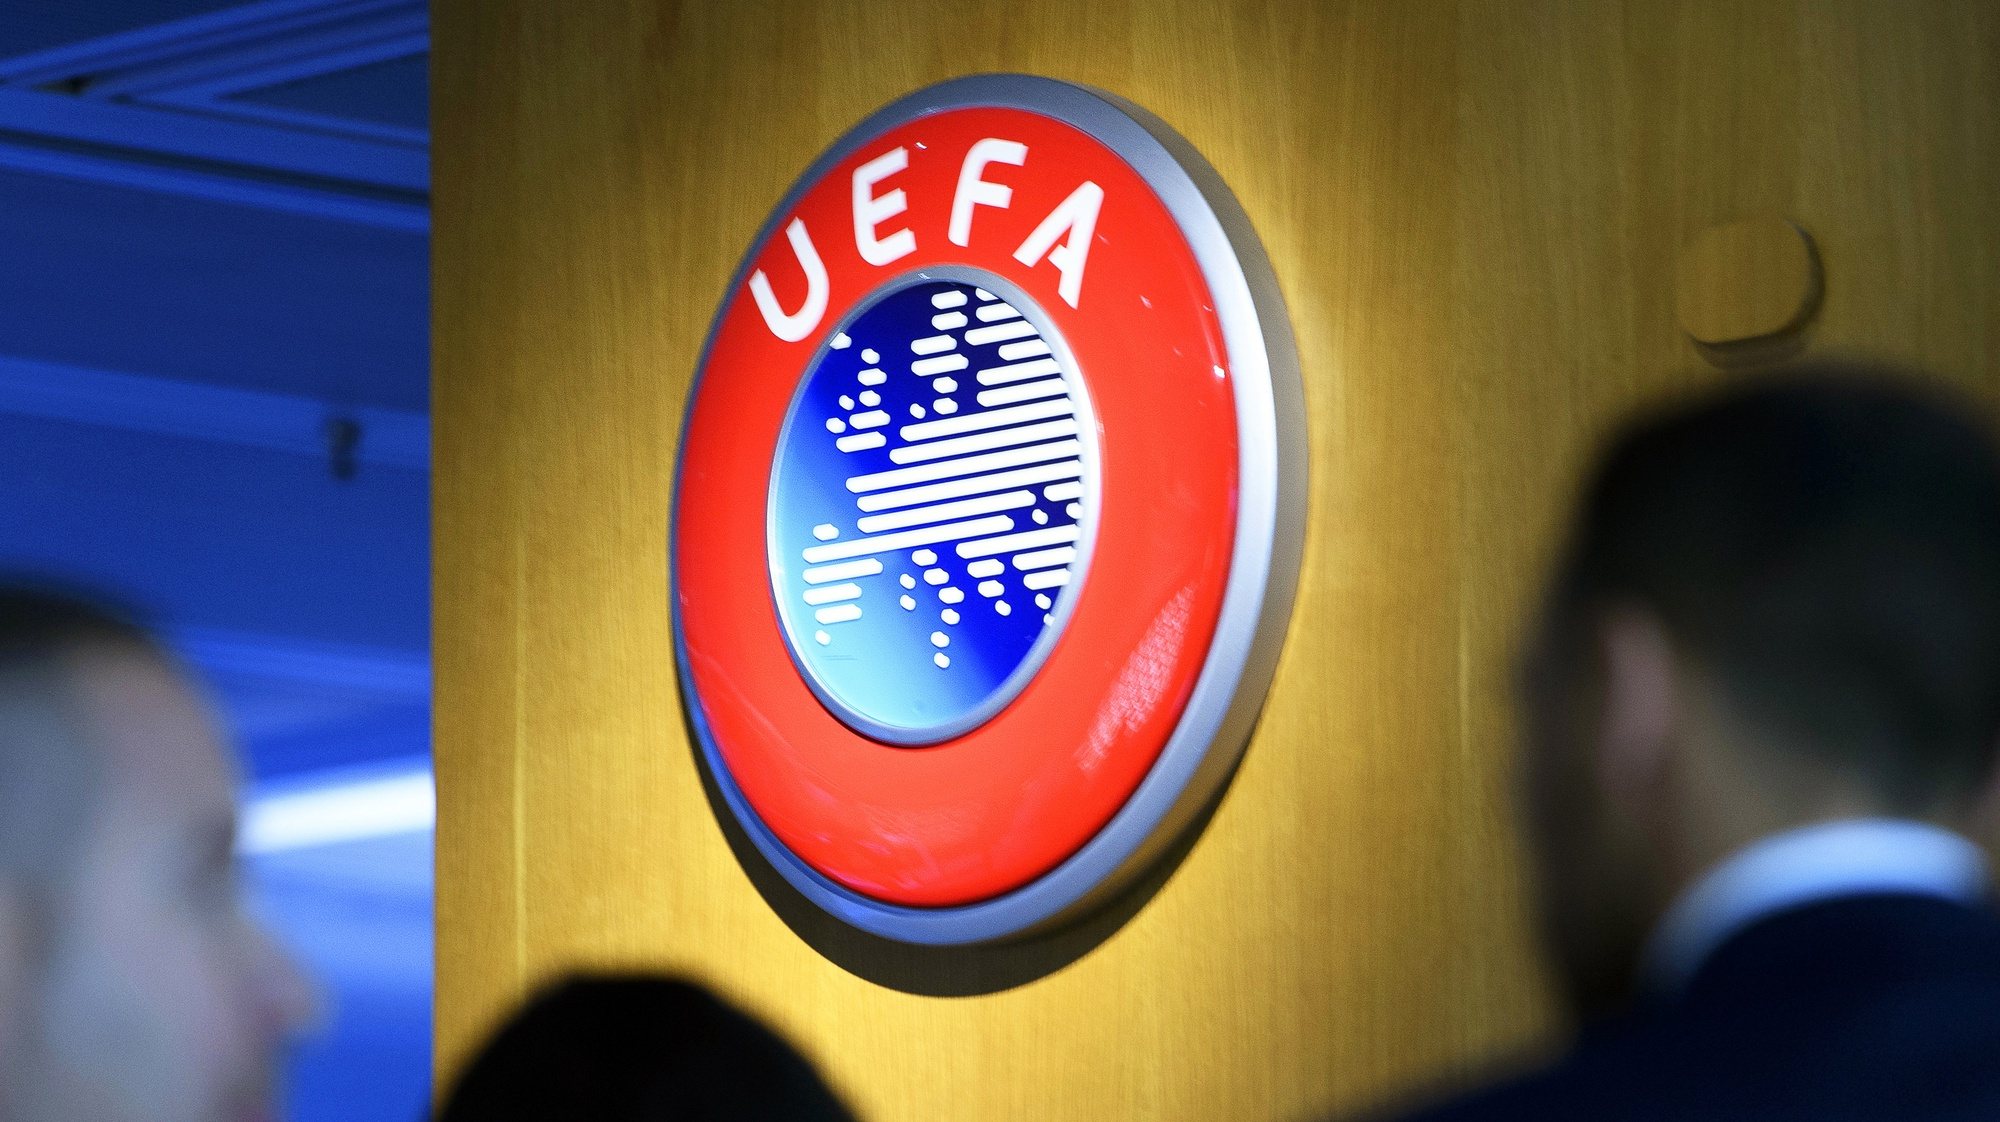 epa08337222 (FILE) - The UEFA logo on display after the meeting of the UEFA Executive Committee at the UEFA headquarters in Nyon, Switzerland, 07 December 2017 (re-issued on 01 April 2020). The UEFA has postponed on 01 April all planned matches of the national team&#039;s in June until further notice. The same applies to Champions and Europa League matches of this season.  EPA/LAURENT GILLIERON *** Local Caption *** 55950362